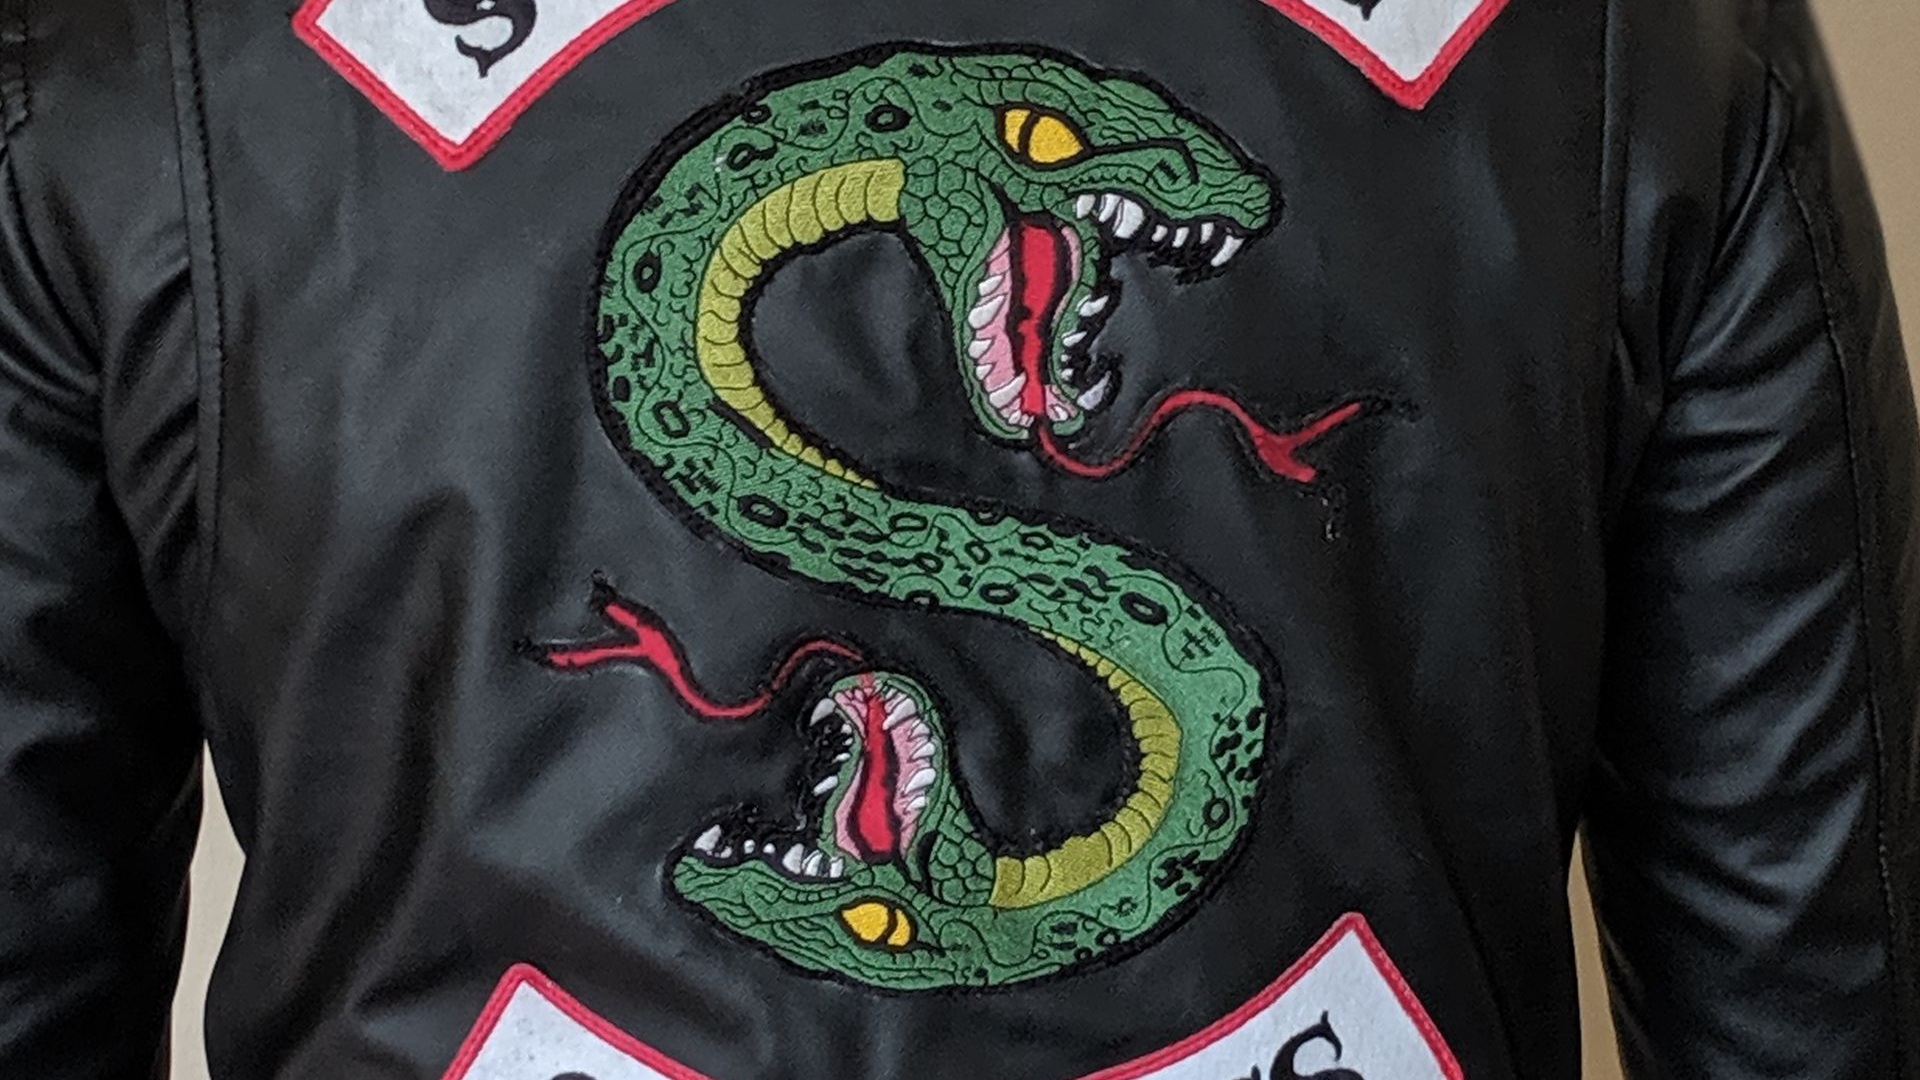 This Riverdale Southside Serpents Jacket Is Not My Cup Of Tea But Is Still A Solid Jacket Geektyrant